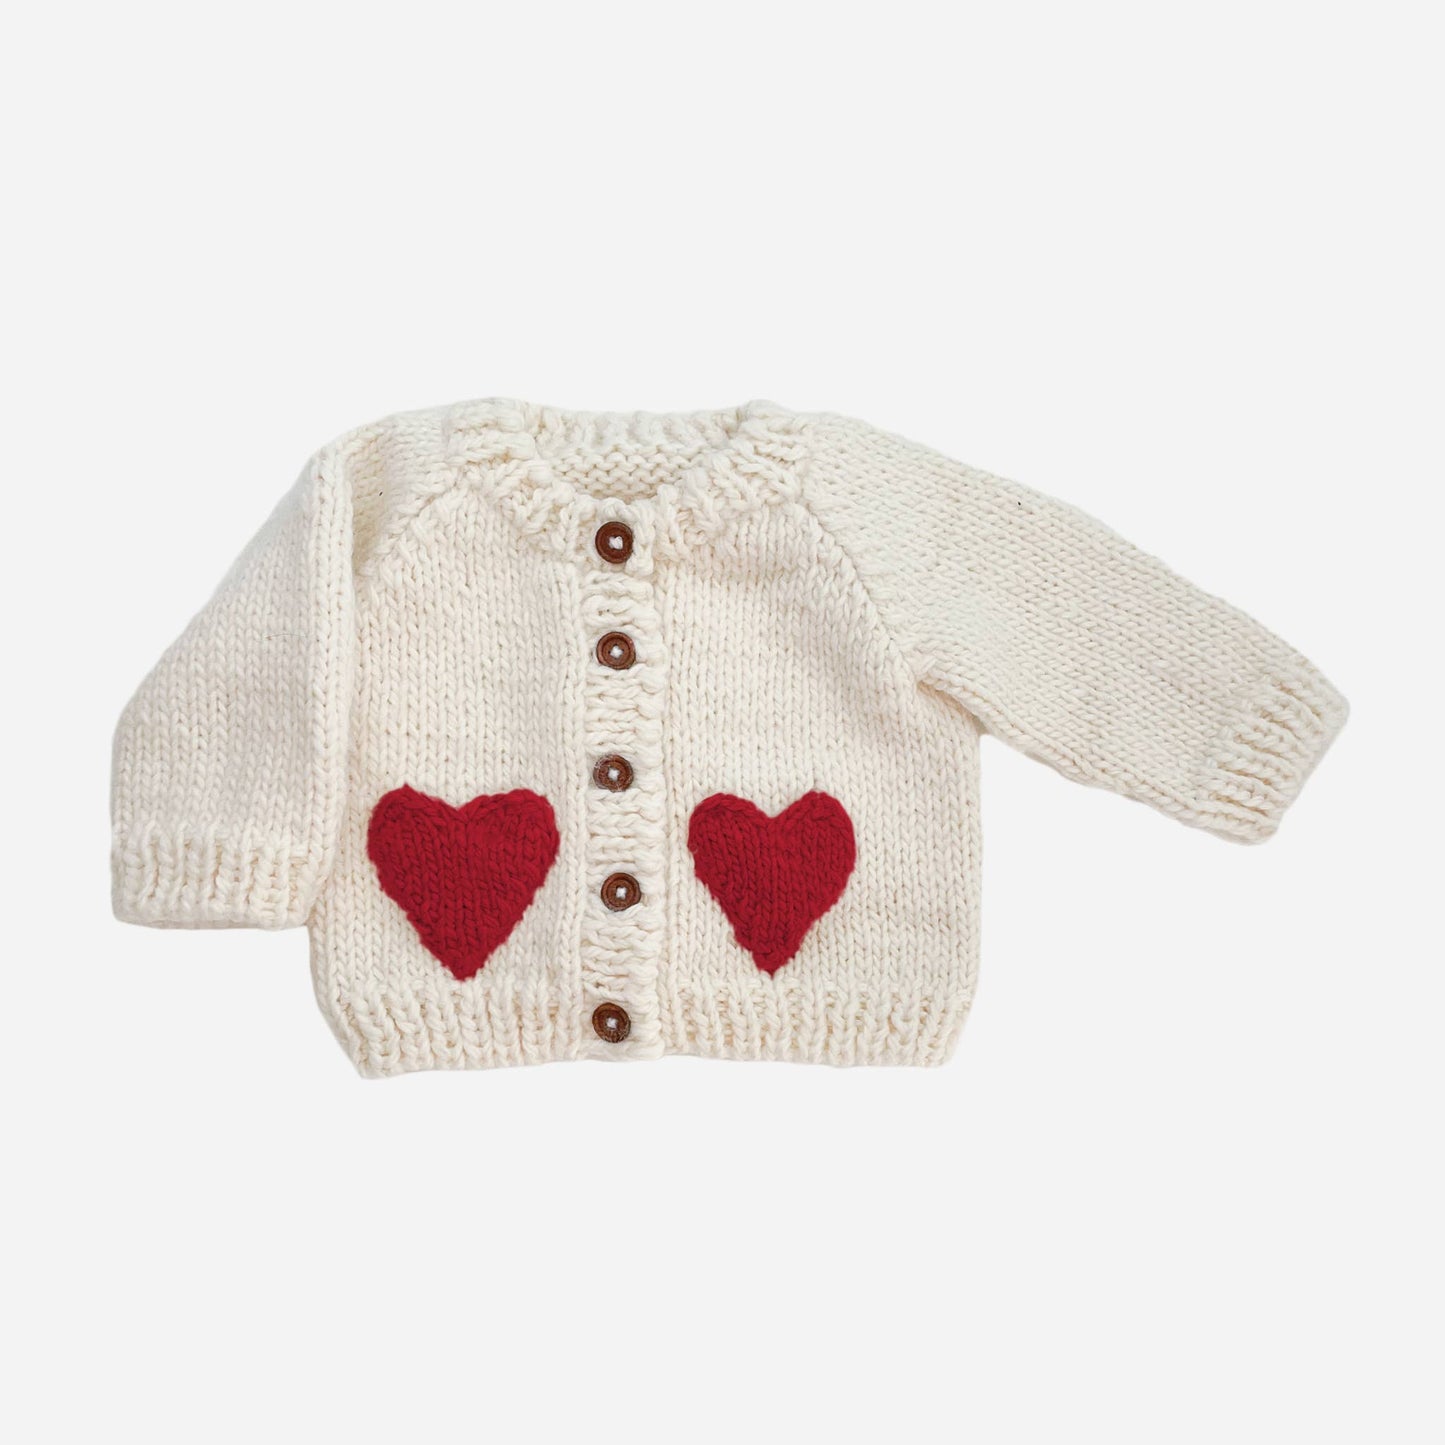 Red Heart Hand-Knit Cardigan